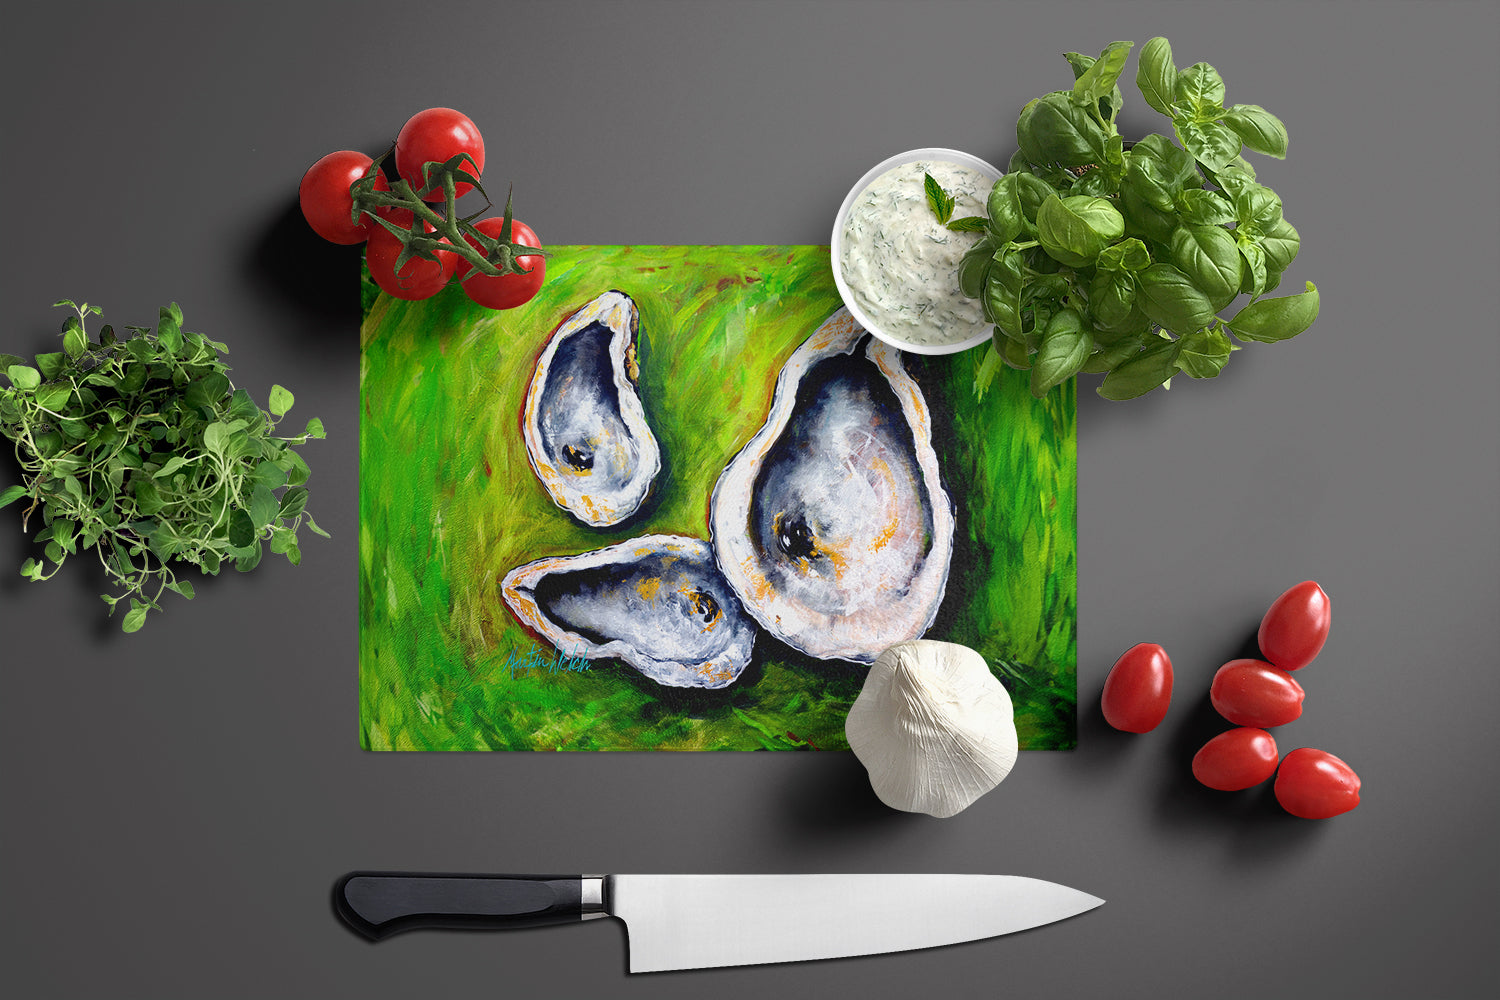 All Shucked Oysters Glass Cutting Board